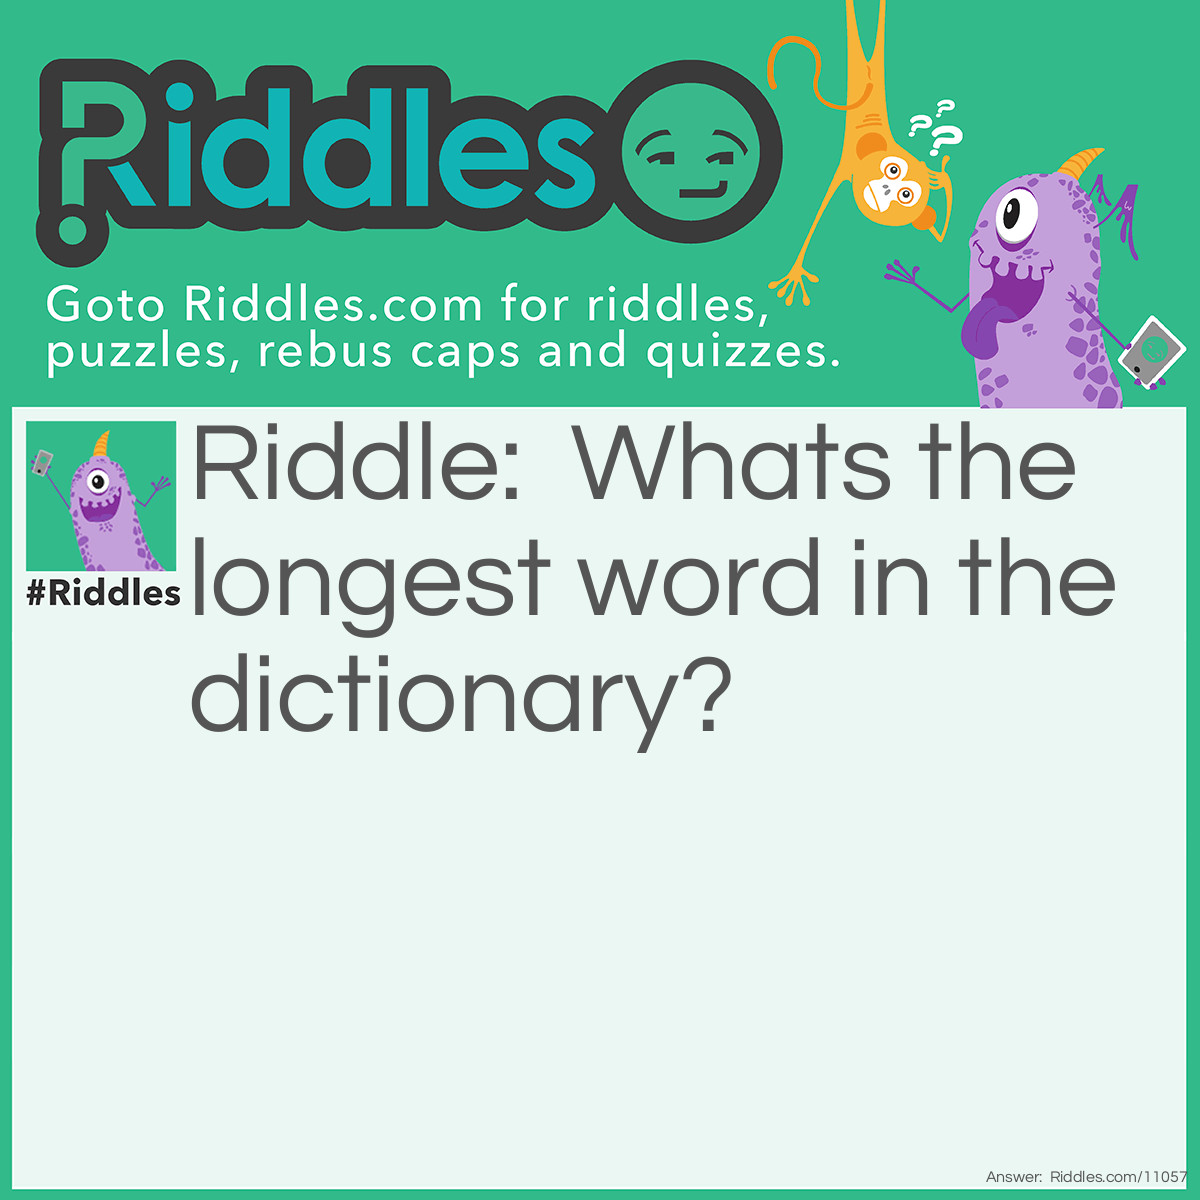 Riddle: Whats the longest word in the dictionary? Answer: Smiles. S+miles+s. there's "miles" in between the 2 "s".